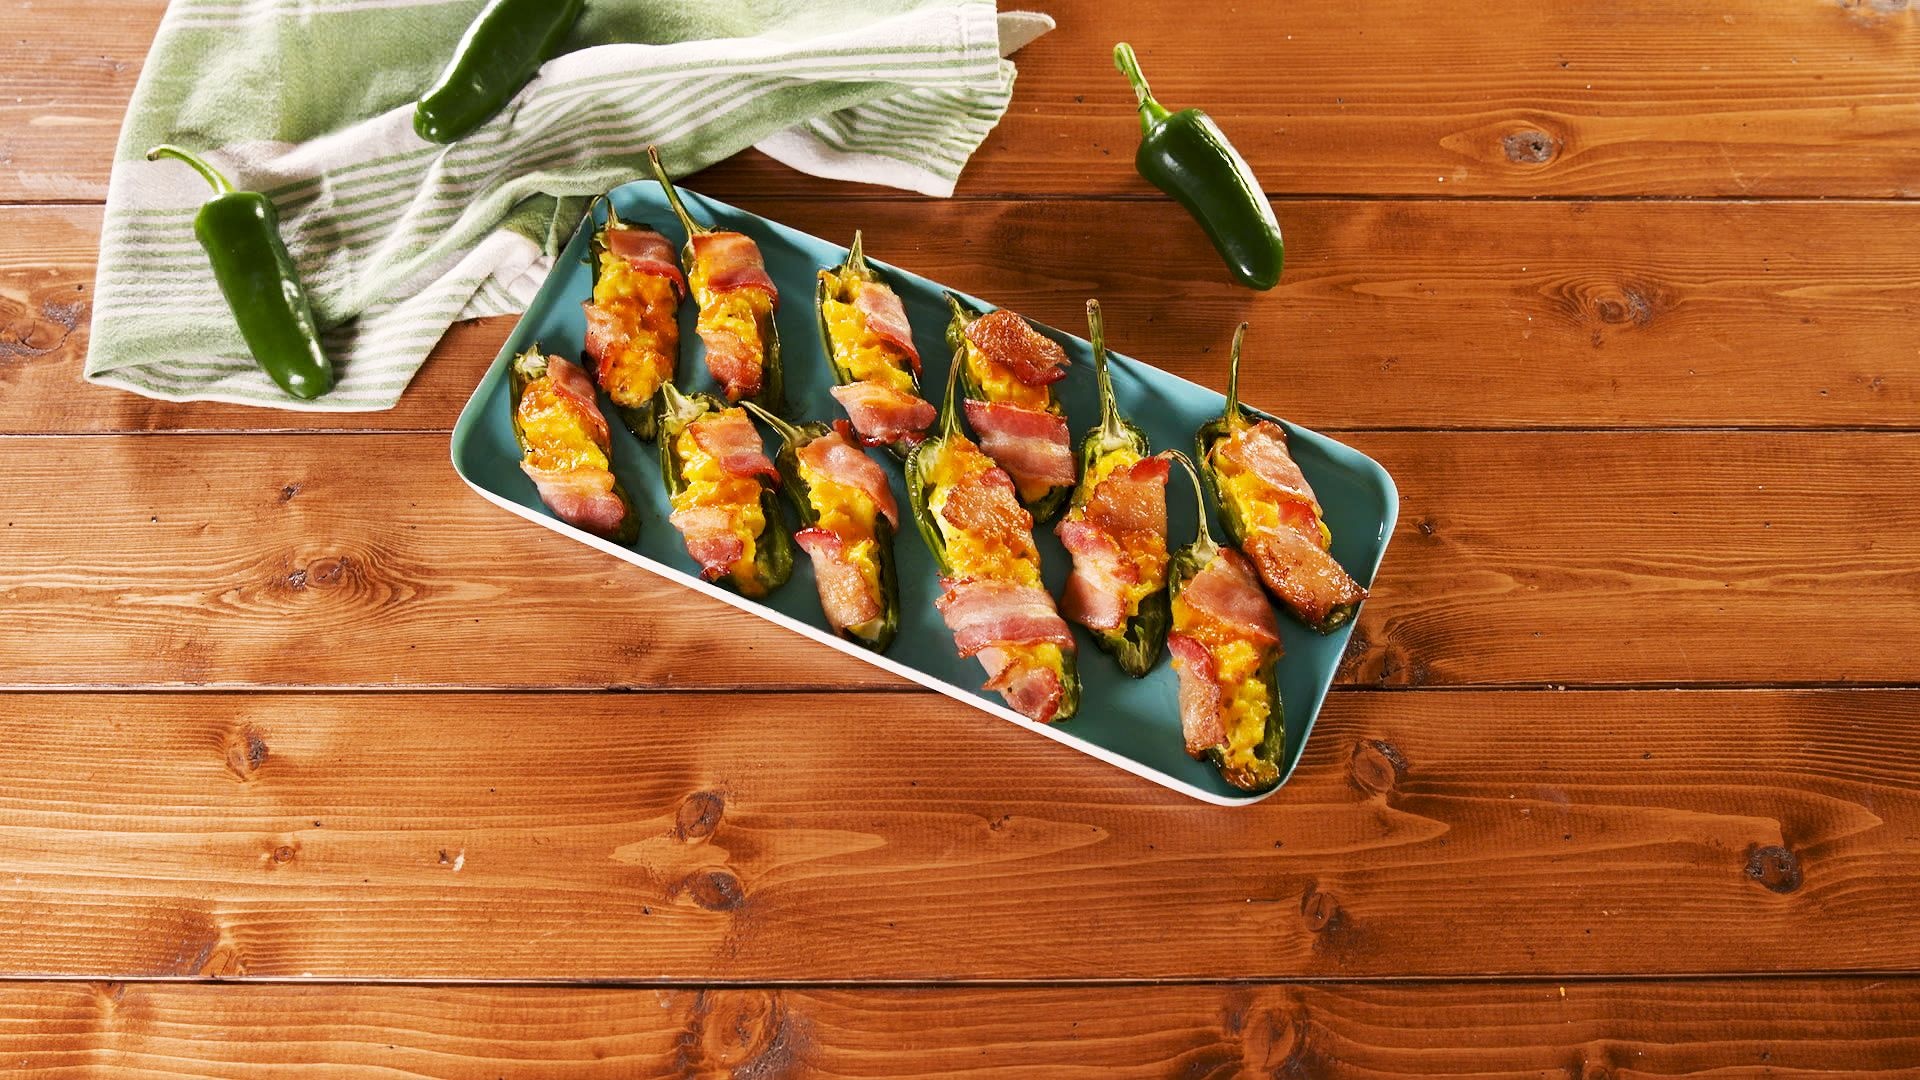 Best jalapeo poppers recipe, Flavorful breakfast option, Cheesy delight, Morning indulgence, 1920x1080 Full HD Desktop